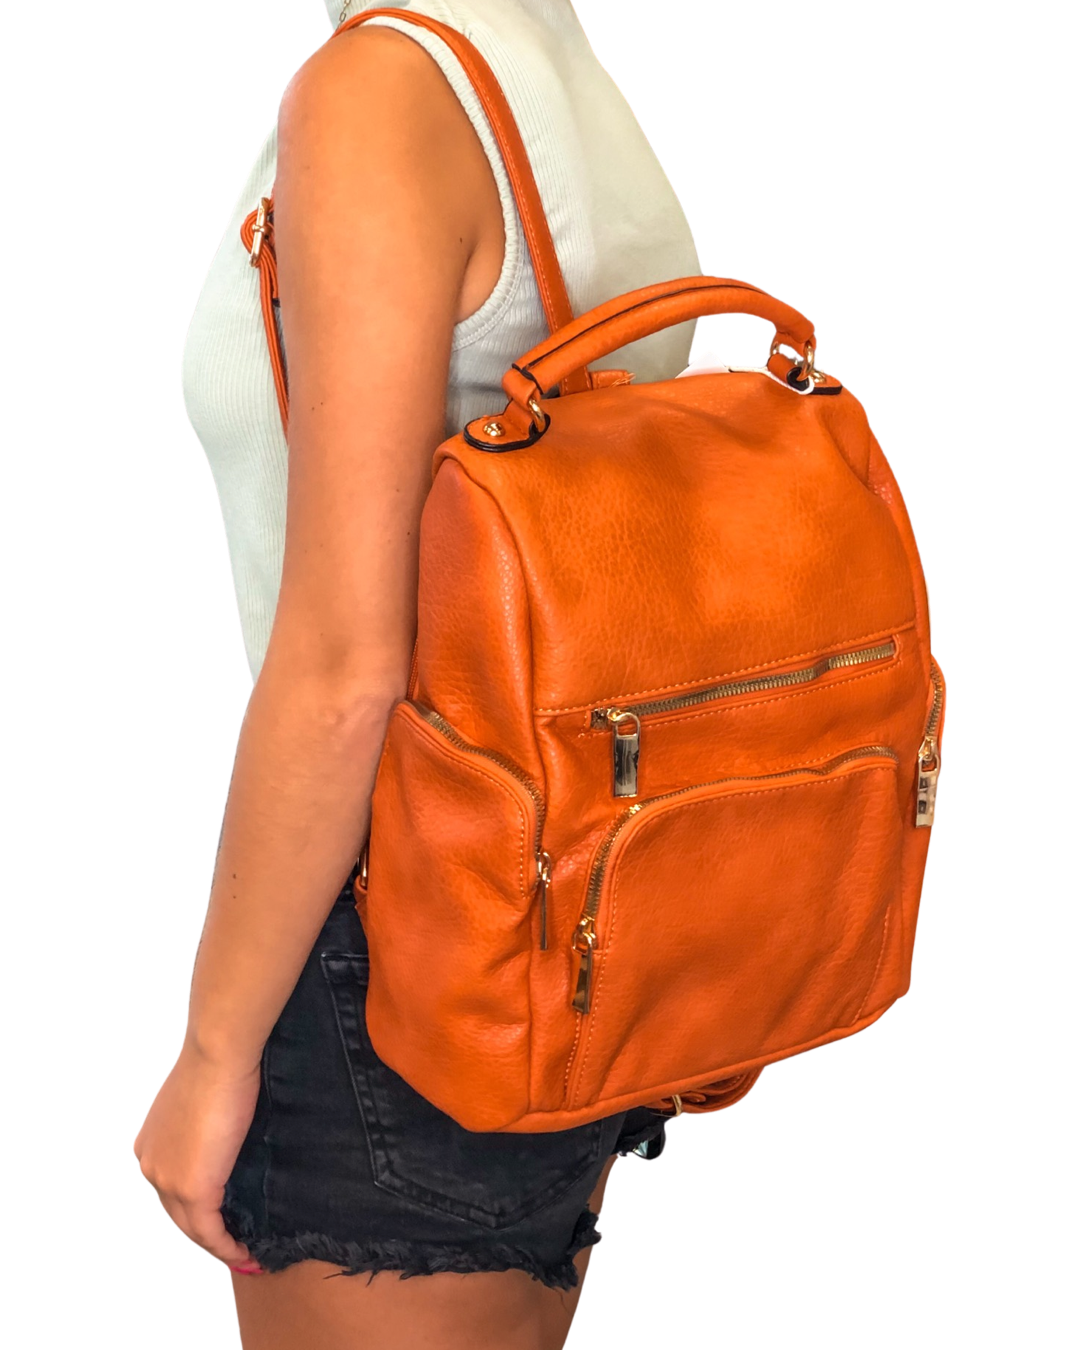 THE CASSIE BACKPACK